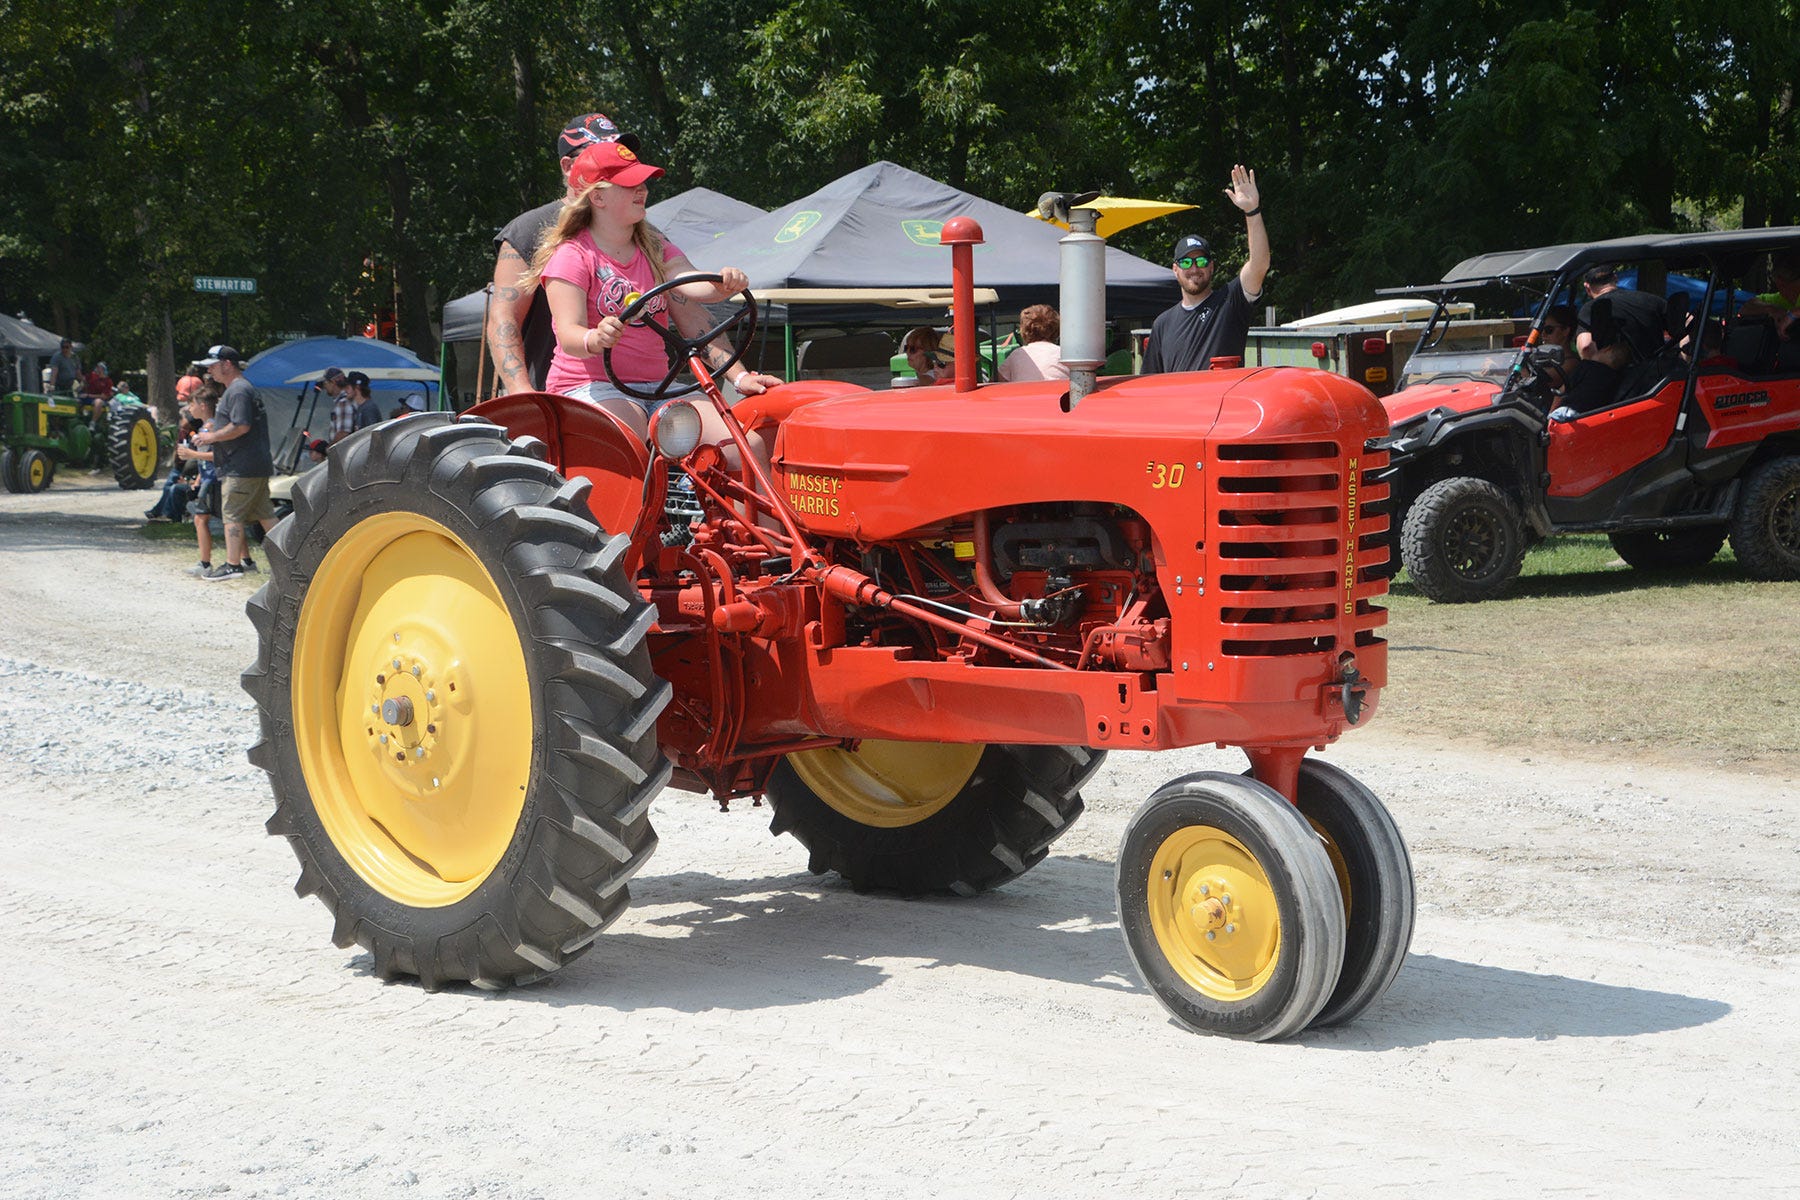 A woman driving a Massey-Harris 30 tractor in a parade